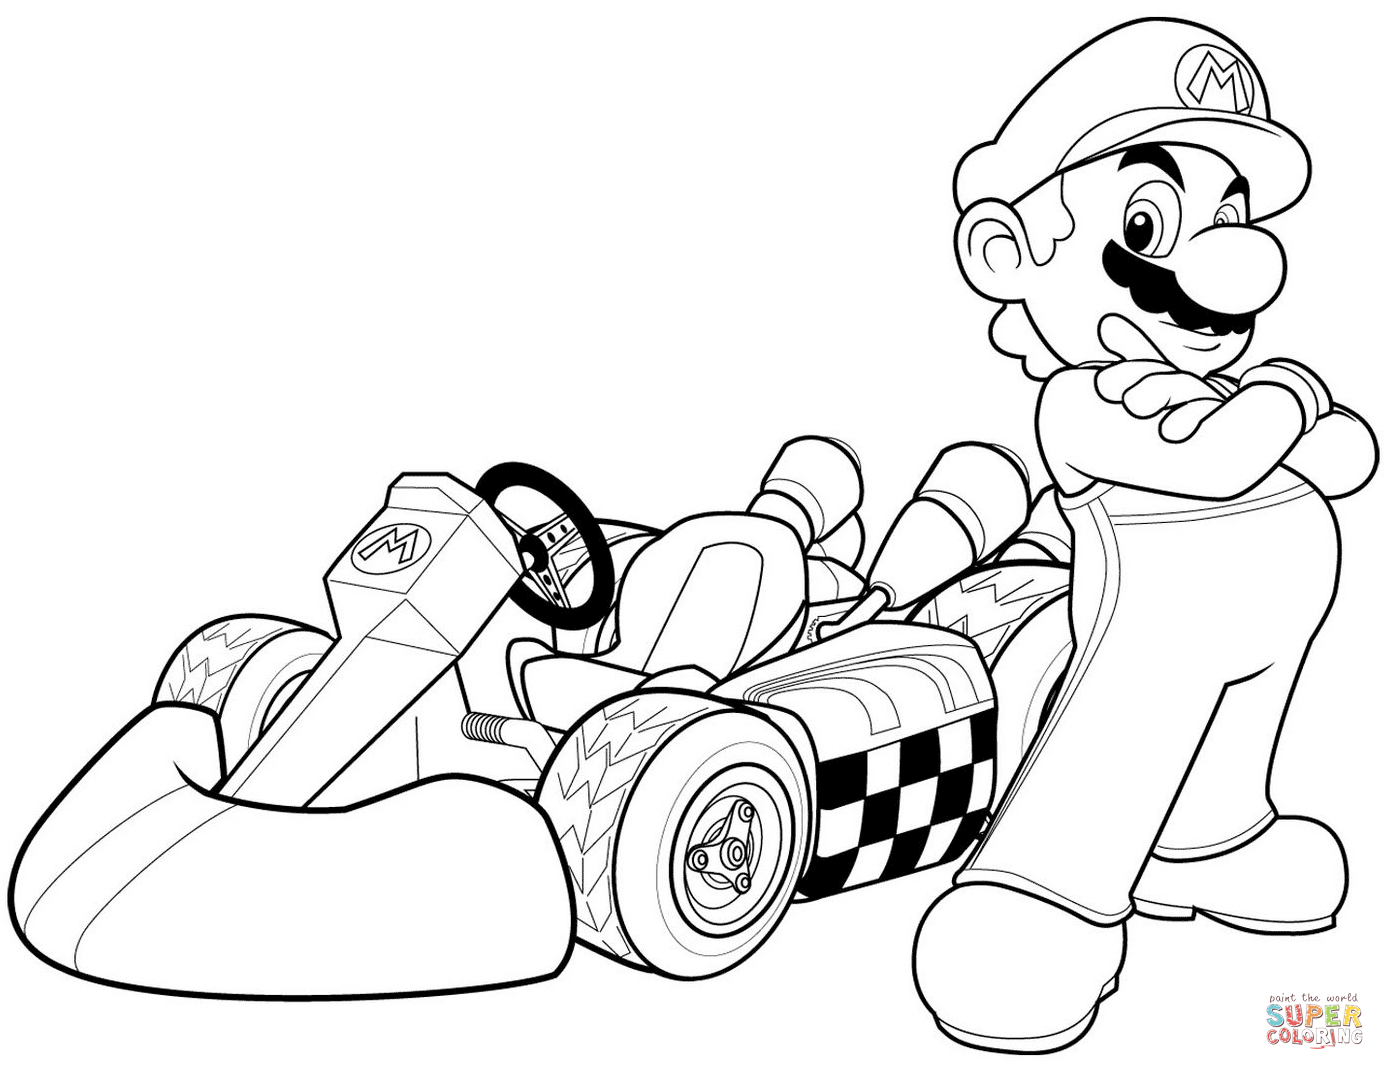 Mario in Mario Kart Wii coloring page | Free Printable Coloring Pages